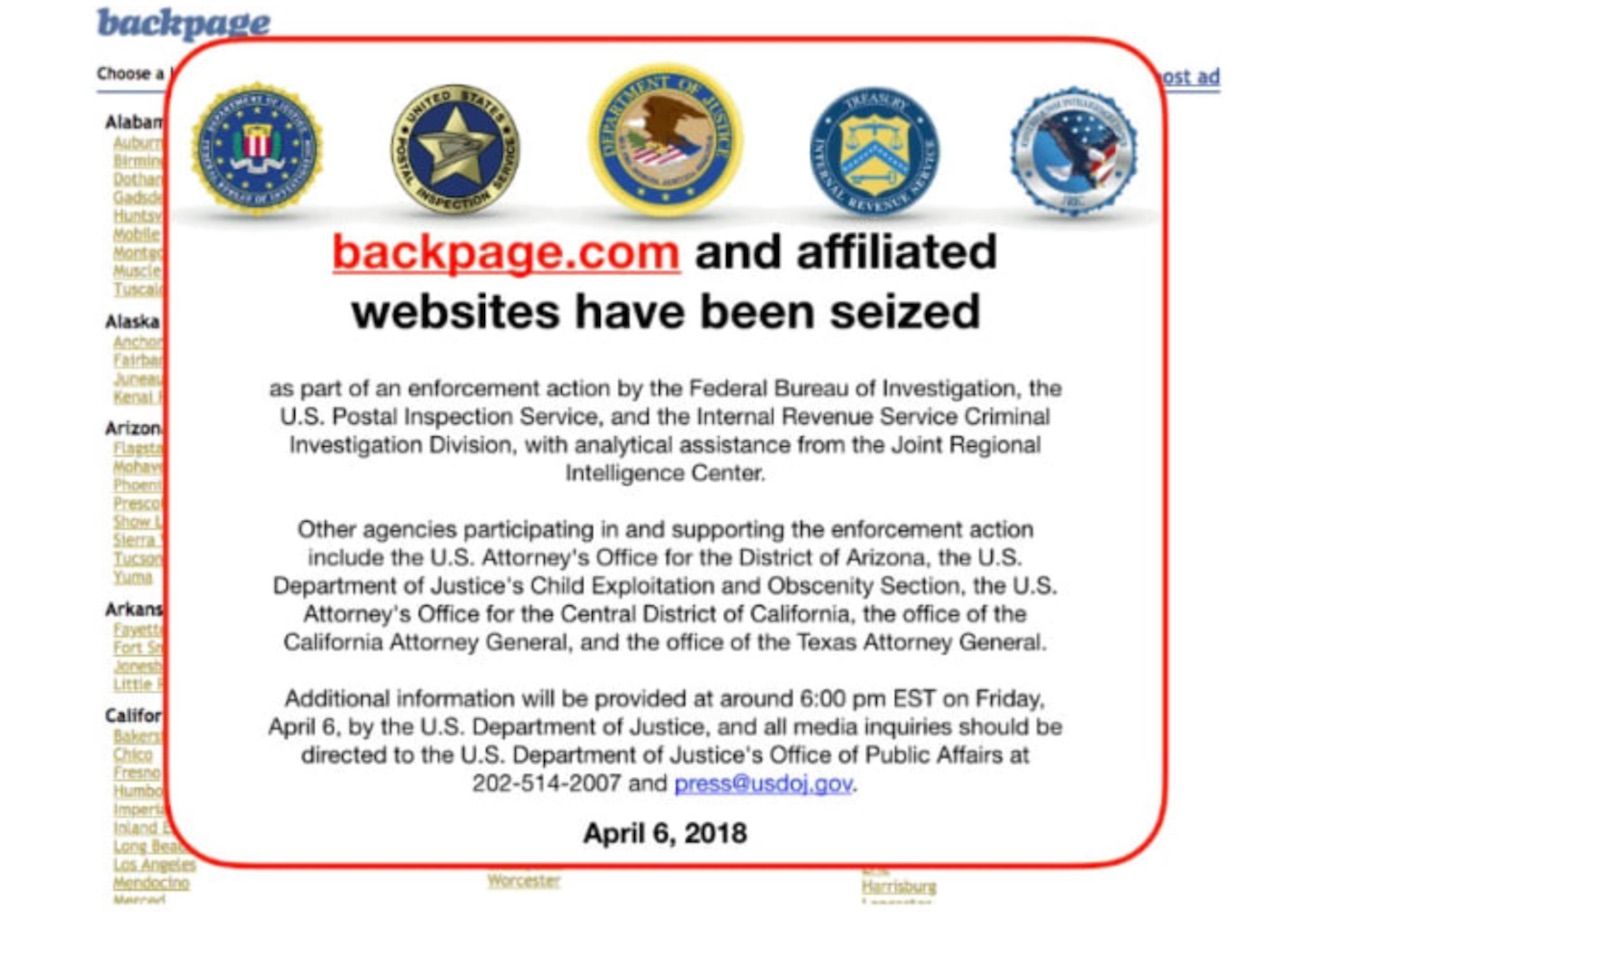 Backpage Faces Court Sanctions Over False Statements for 3rd Time